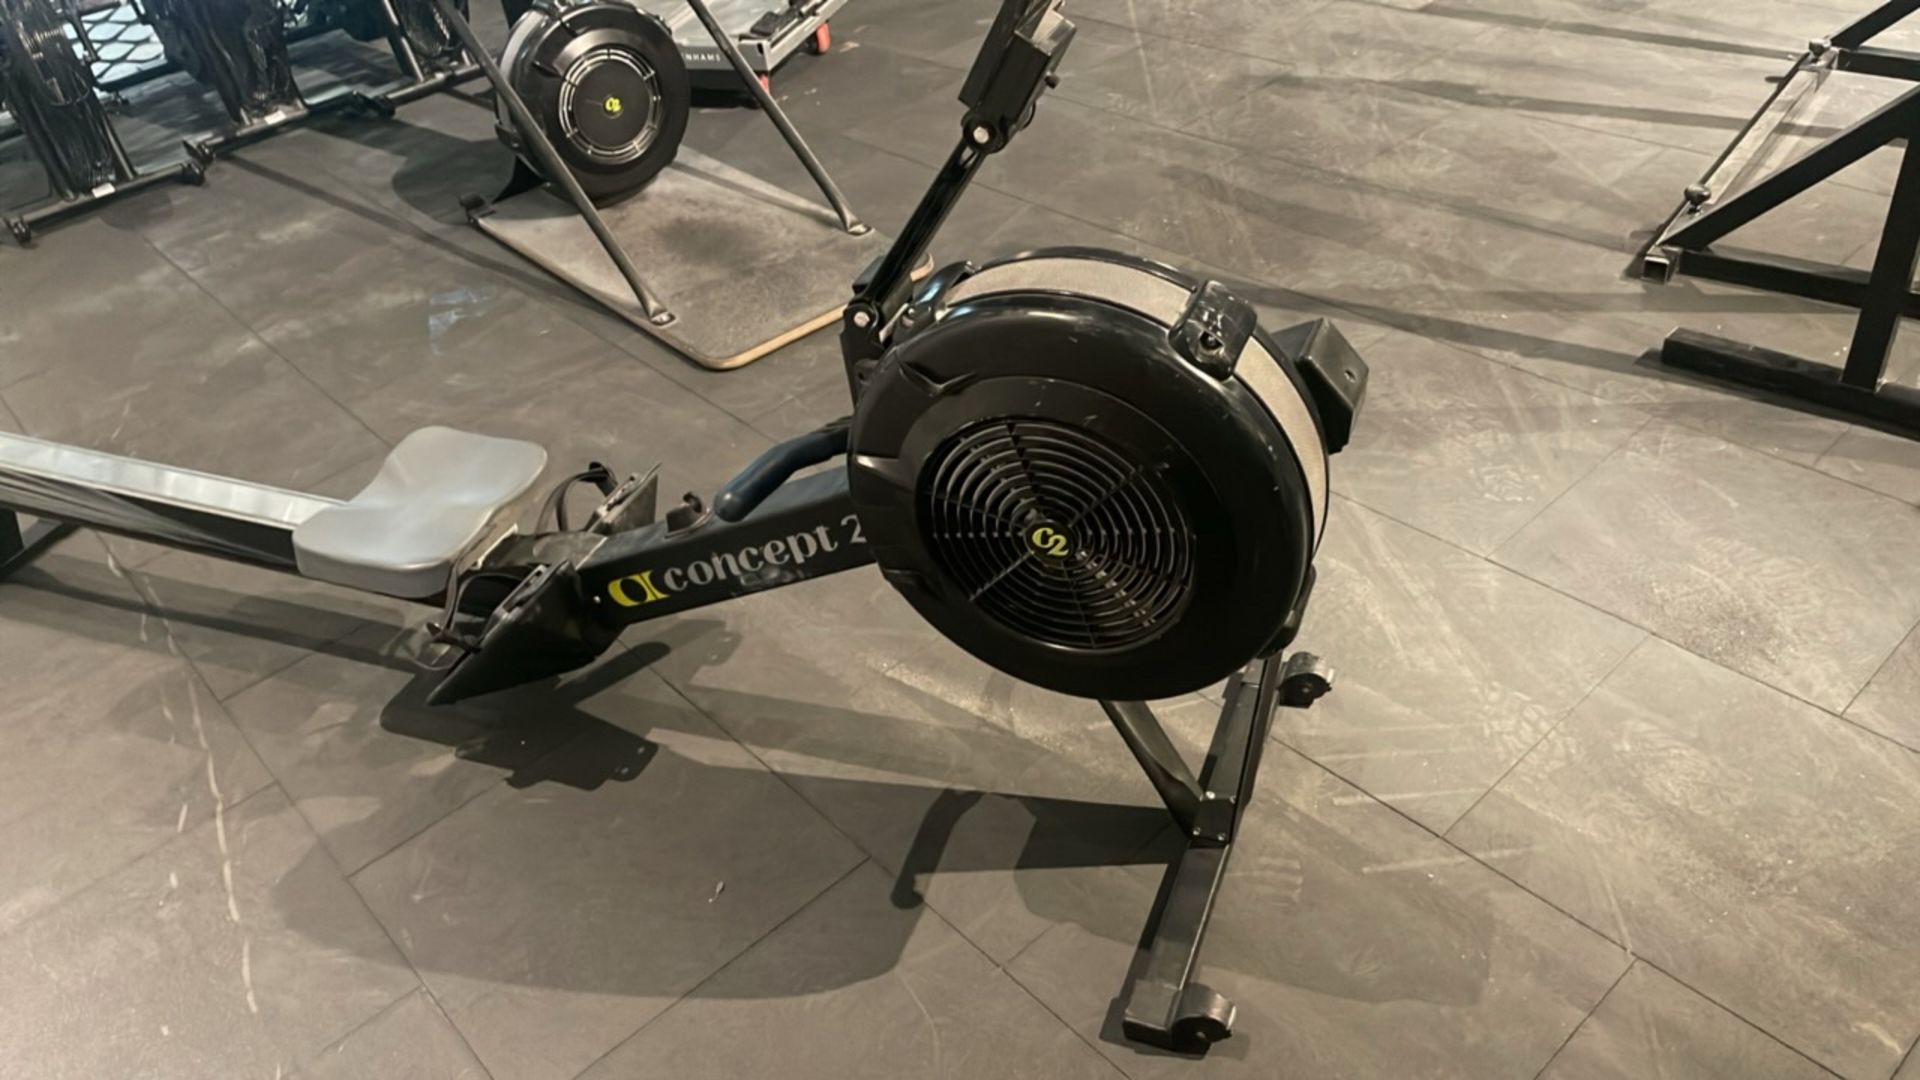 Concept 2 Rower - Image 6 of 10